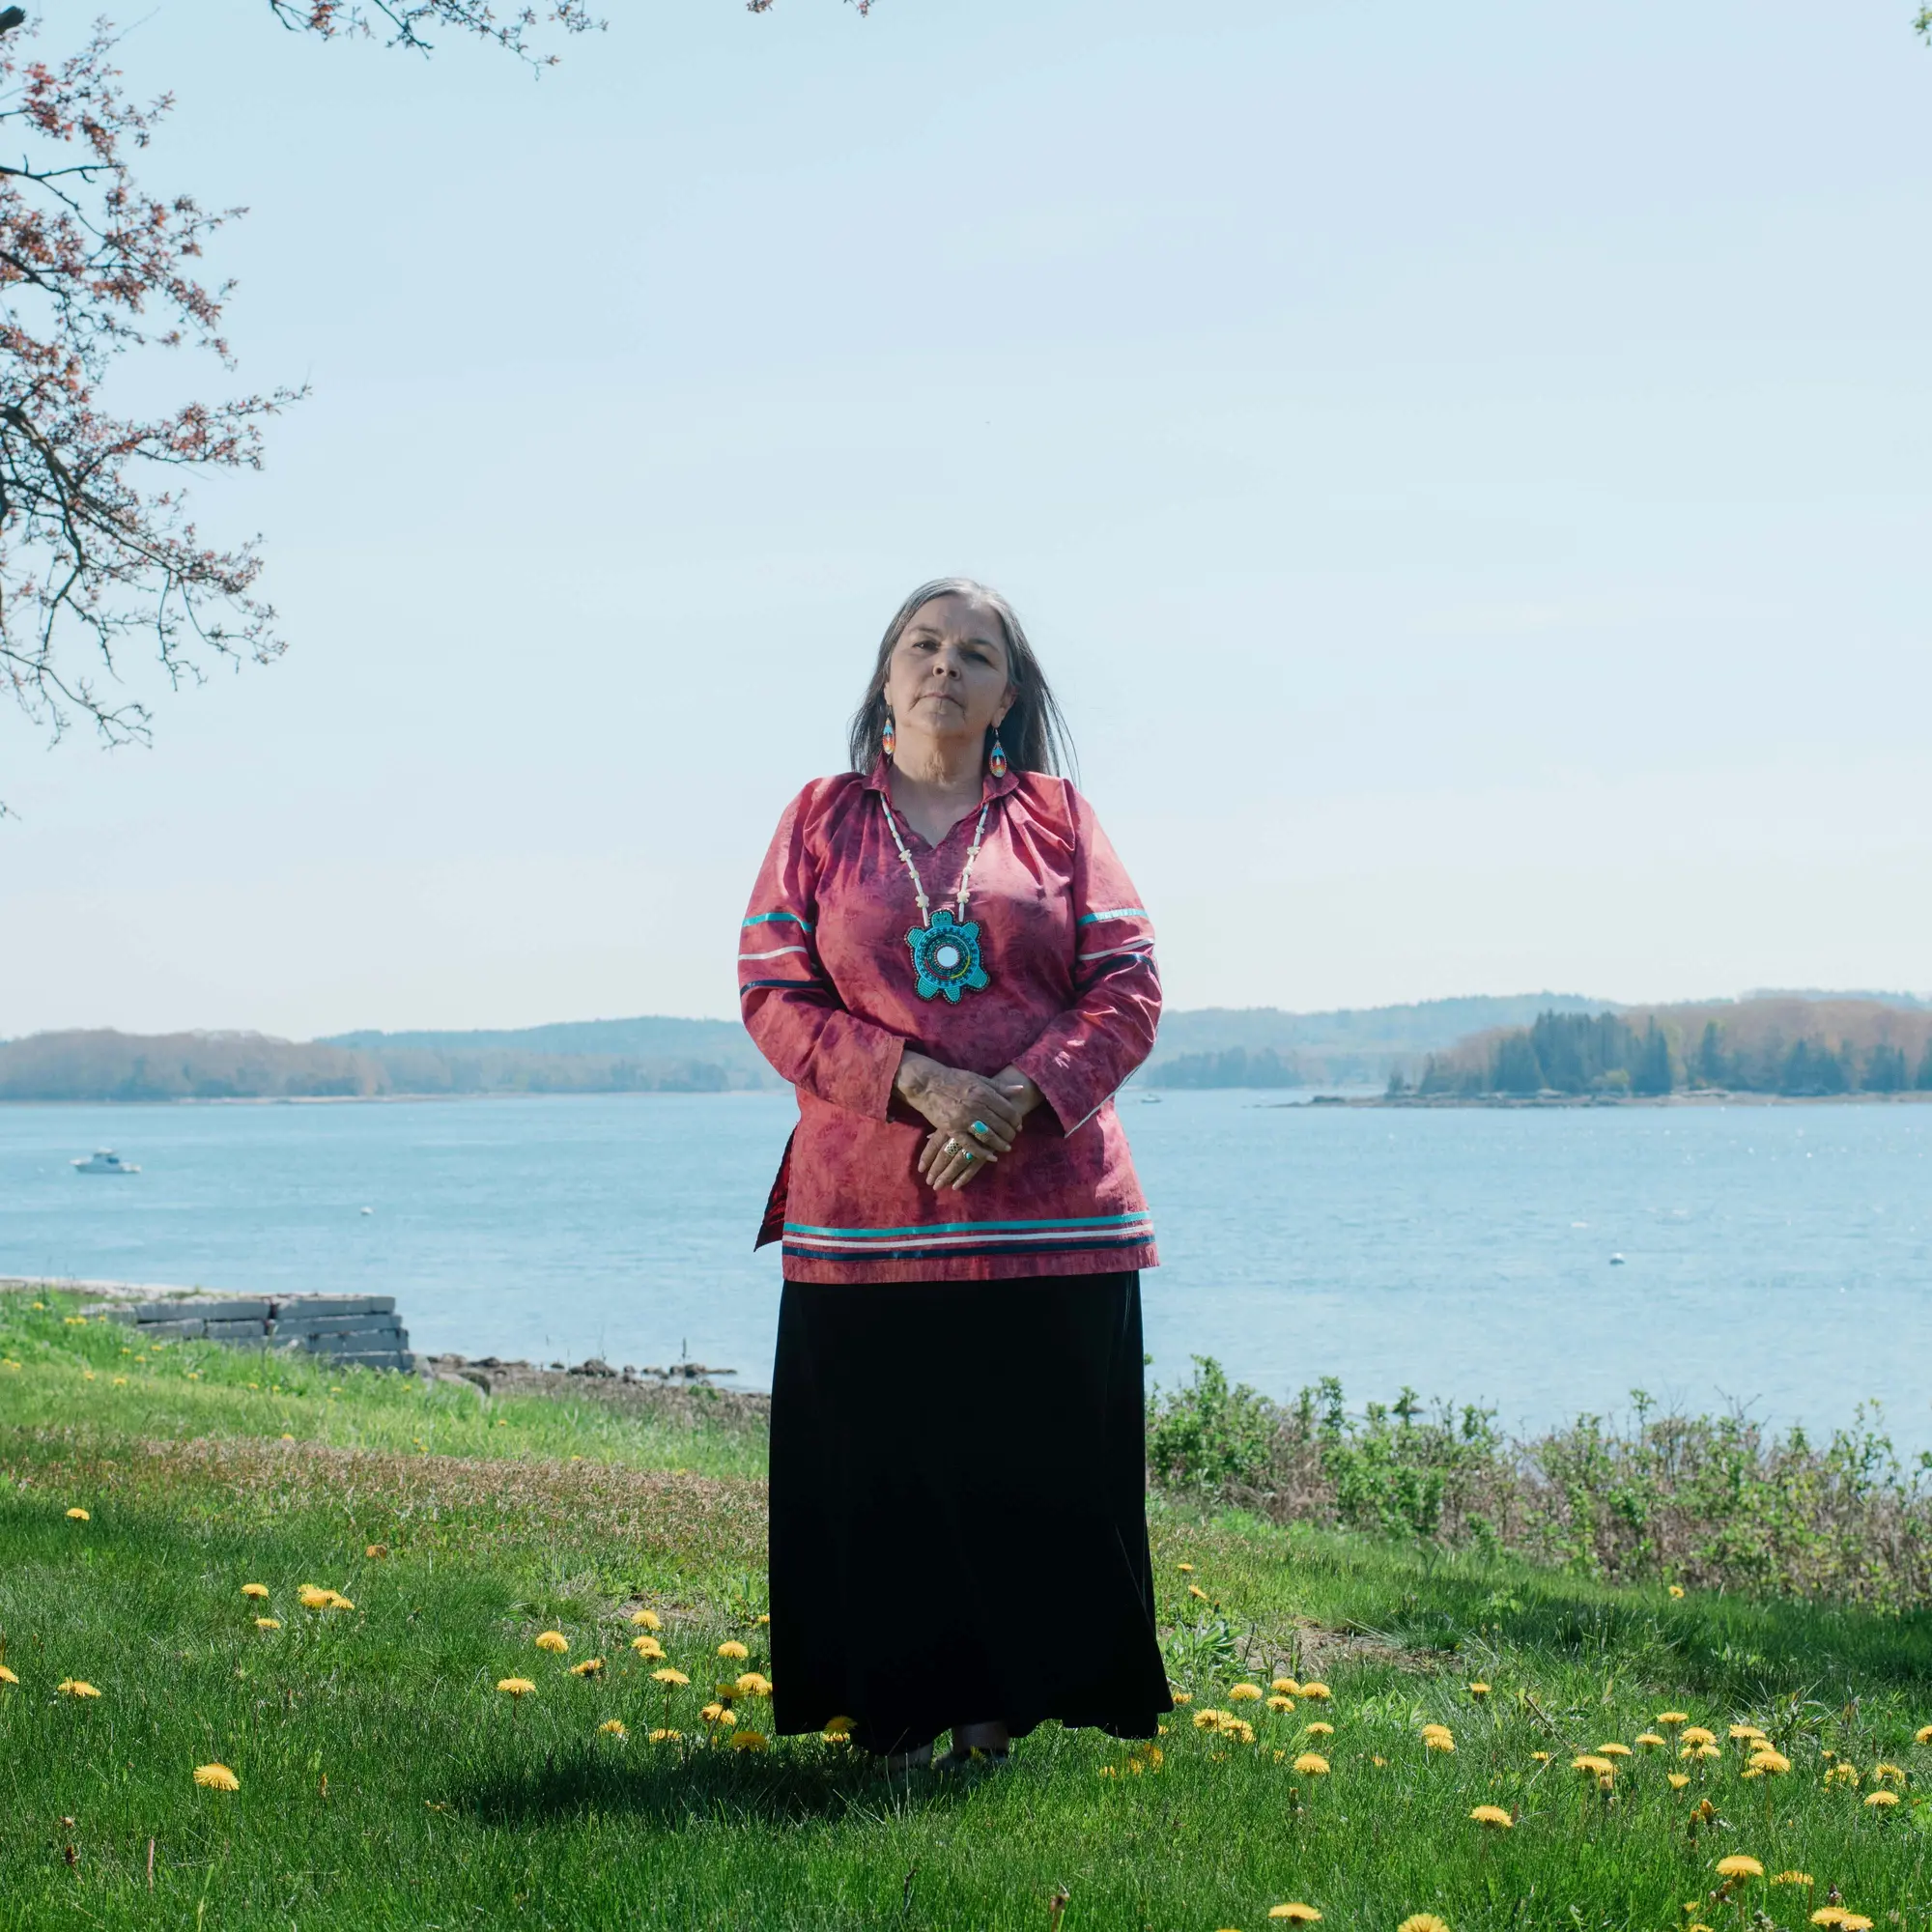 Tribes in Maine Spent Decades Fighting to Rebury Ancestral Remains. Harvard Resisted Them at Nearly Every Turn. (propublica.org)